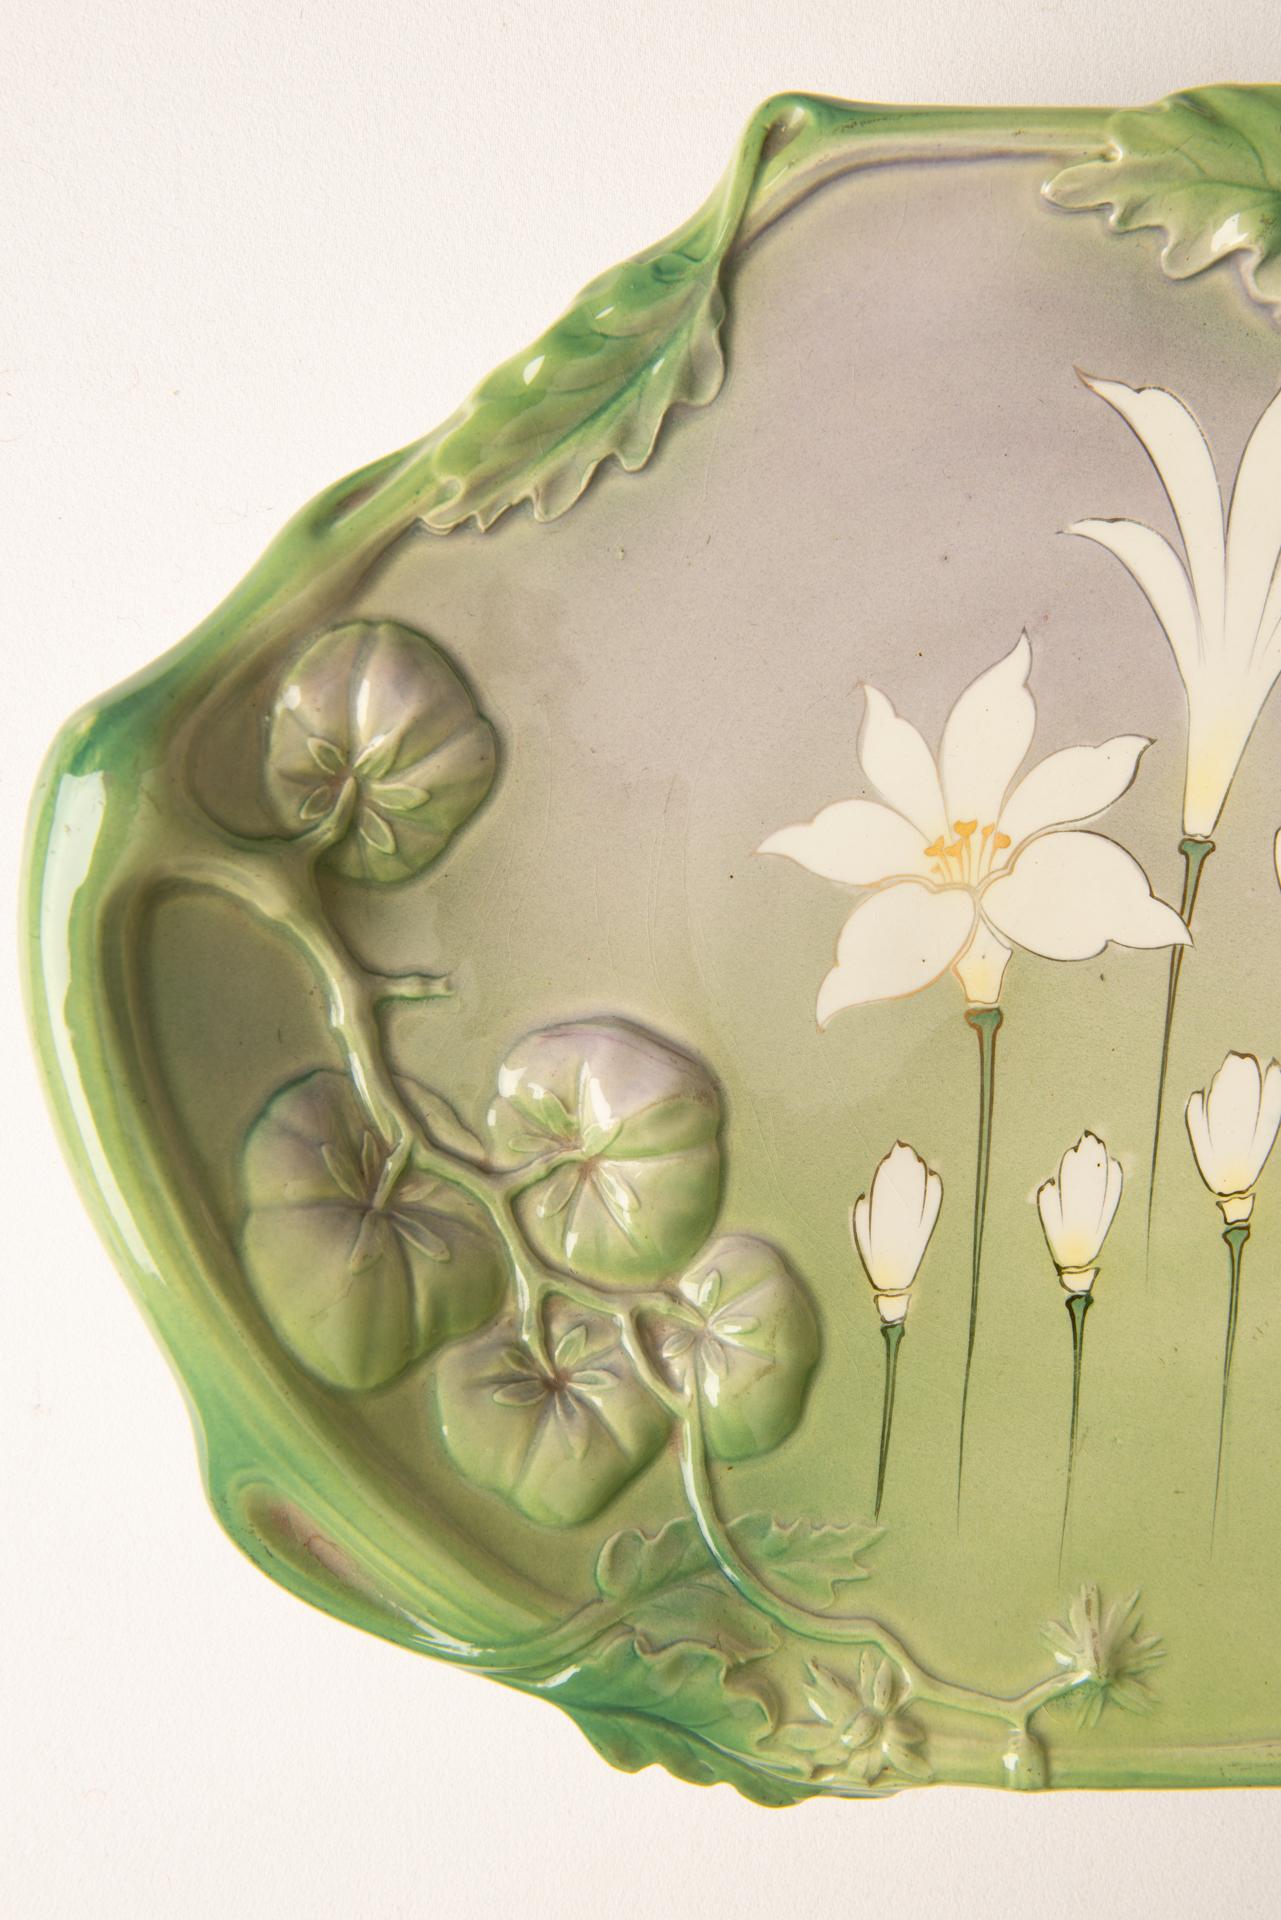 Dyed Art Nouveau Period Ceramic Plate with Leaves in Relief For Sale